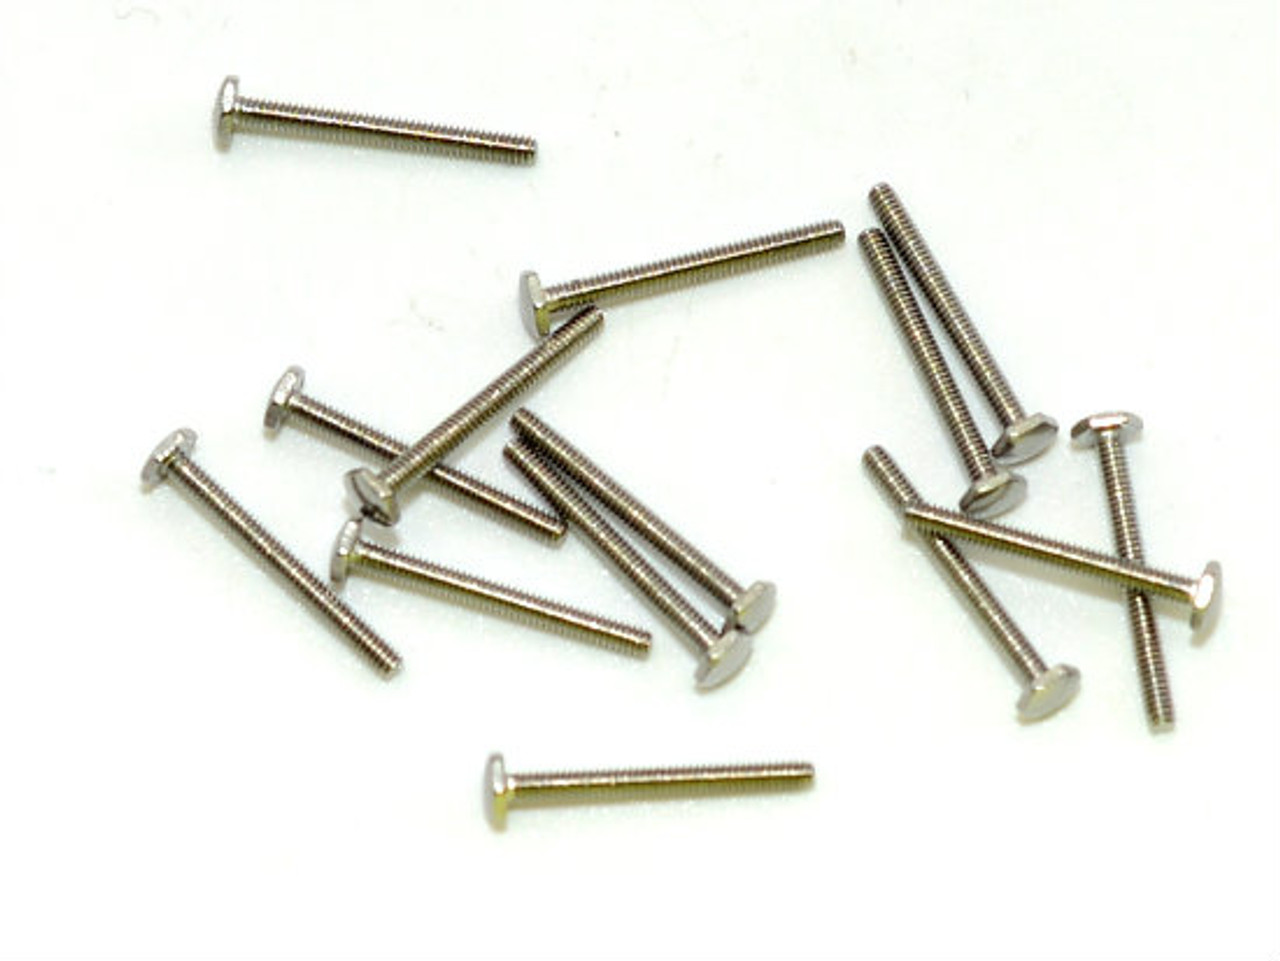 Machine Screw Hex Head
Thread M1.2 (1.20UNM)
Pitch .25mm
Head (ACF) Measurement 2.5mm
Threaded Shank Length 11.7mm
Overall Length 12.5mm
Material Stainless Steel
Finish Color Natural Stainless Steel "Silver" and Polished
The screw head has a slight doom and is polished.
Price is for 100 count package